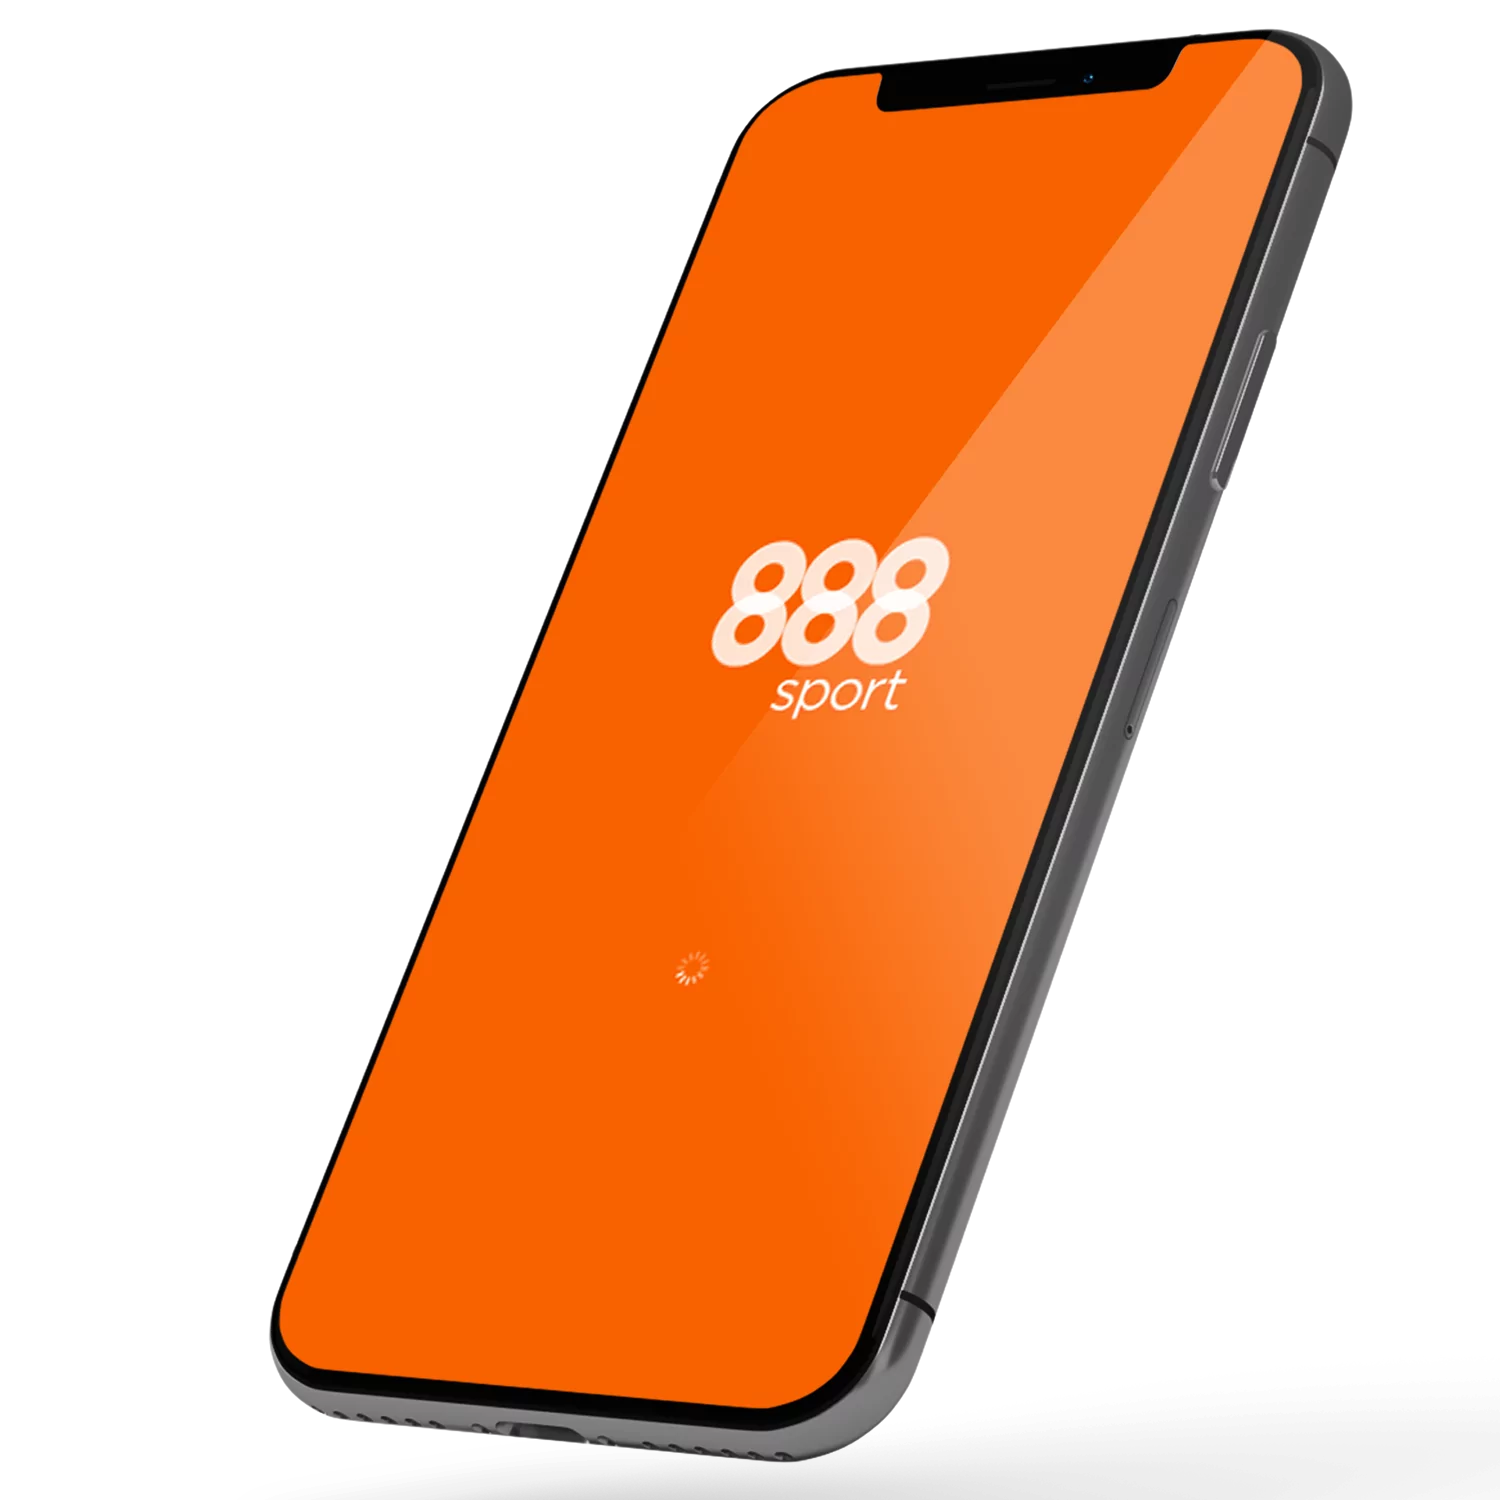 Learn how to download and install the 888sport application.